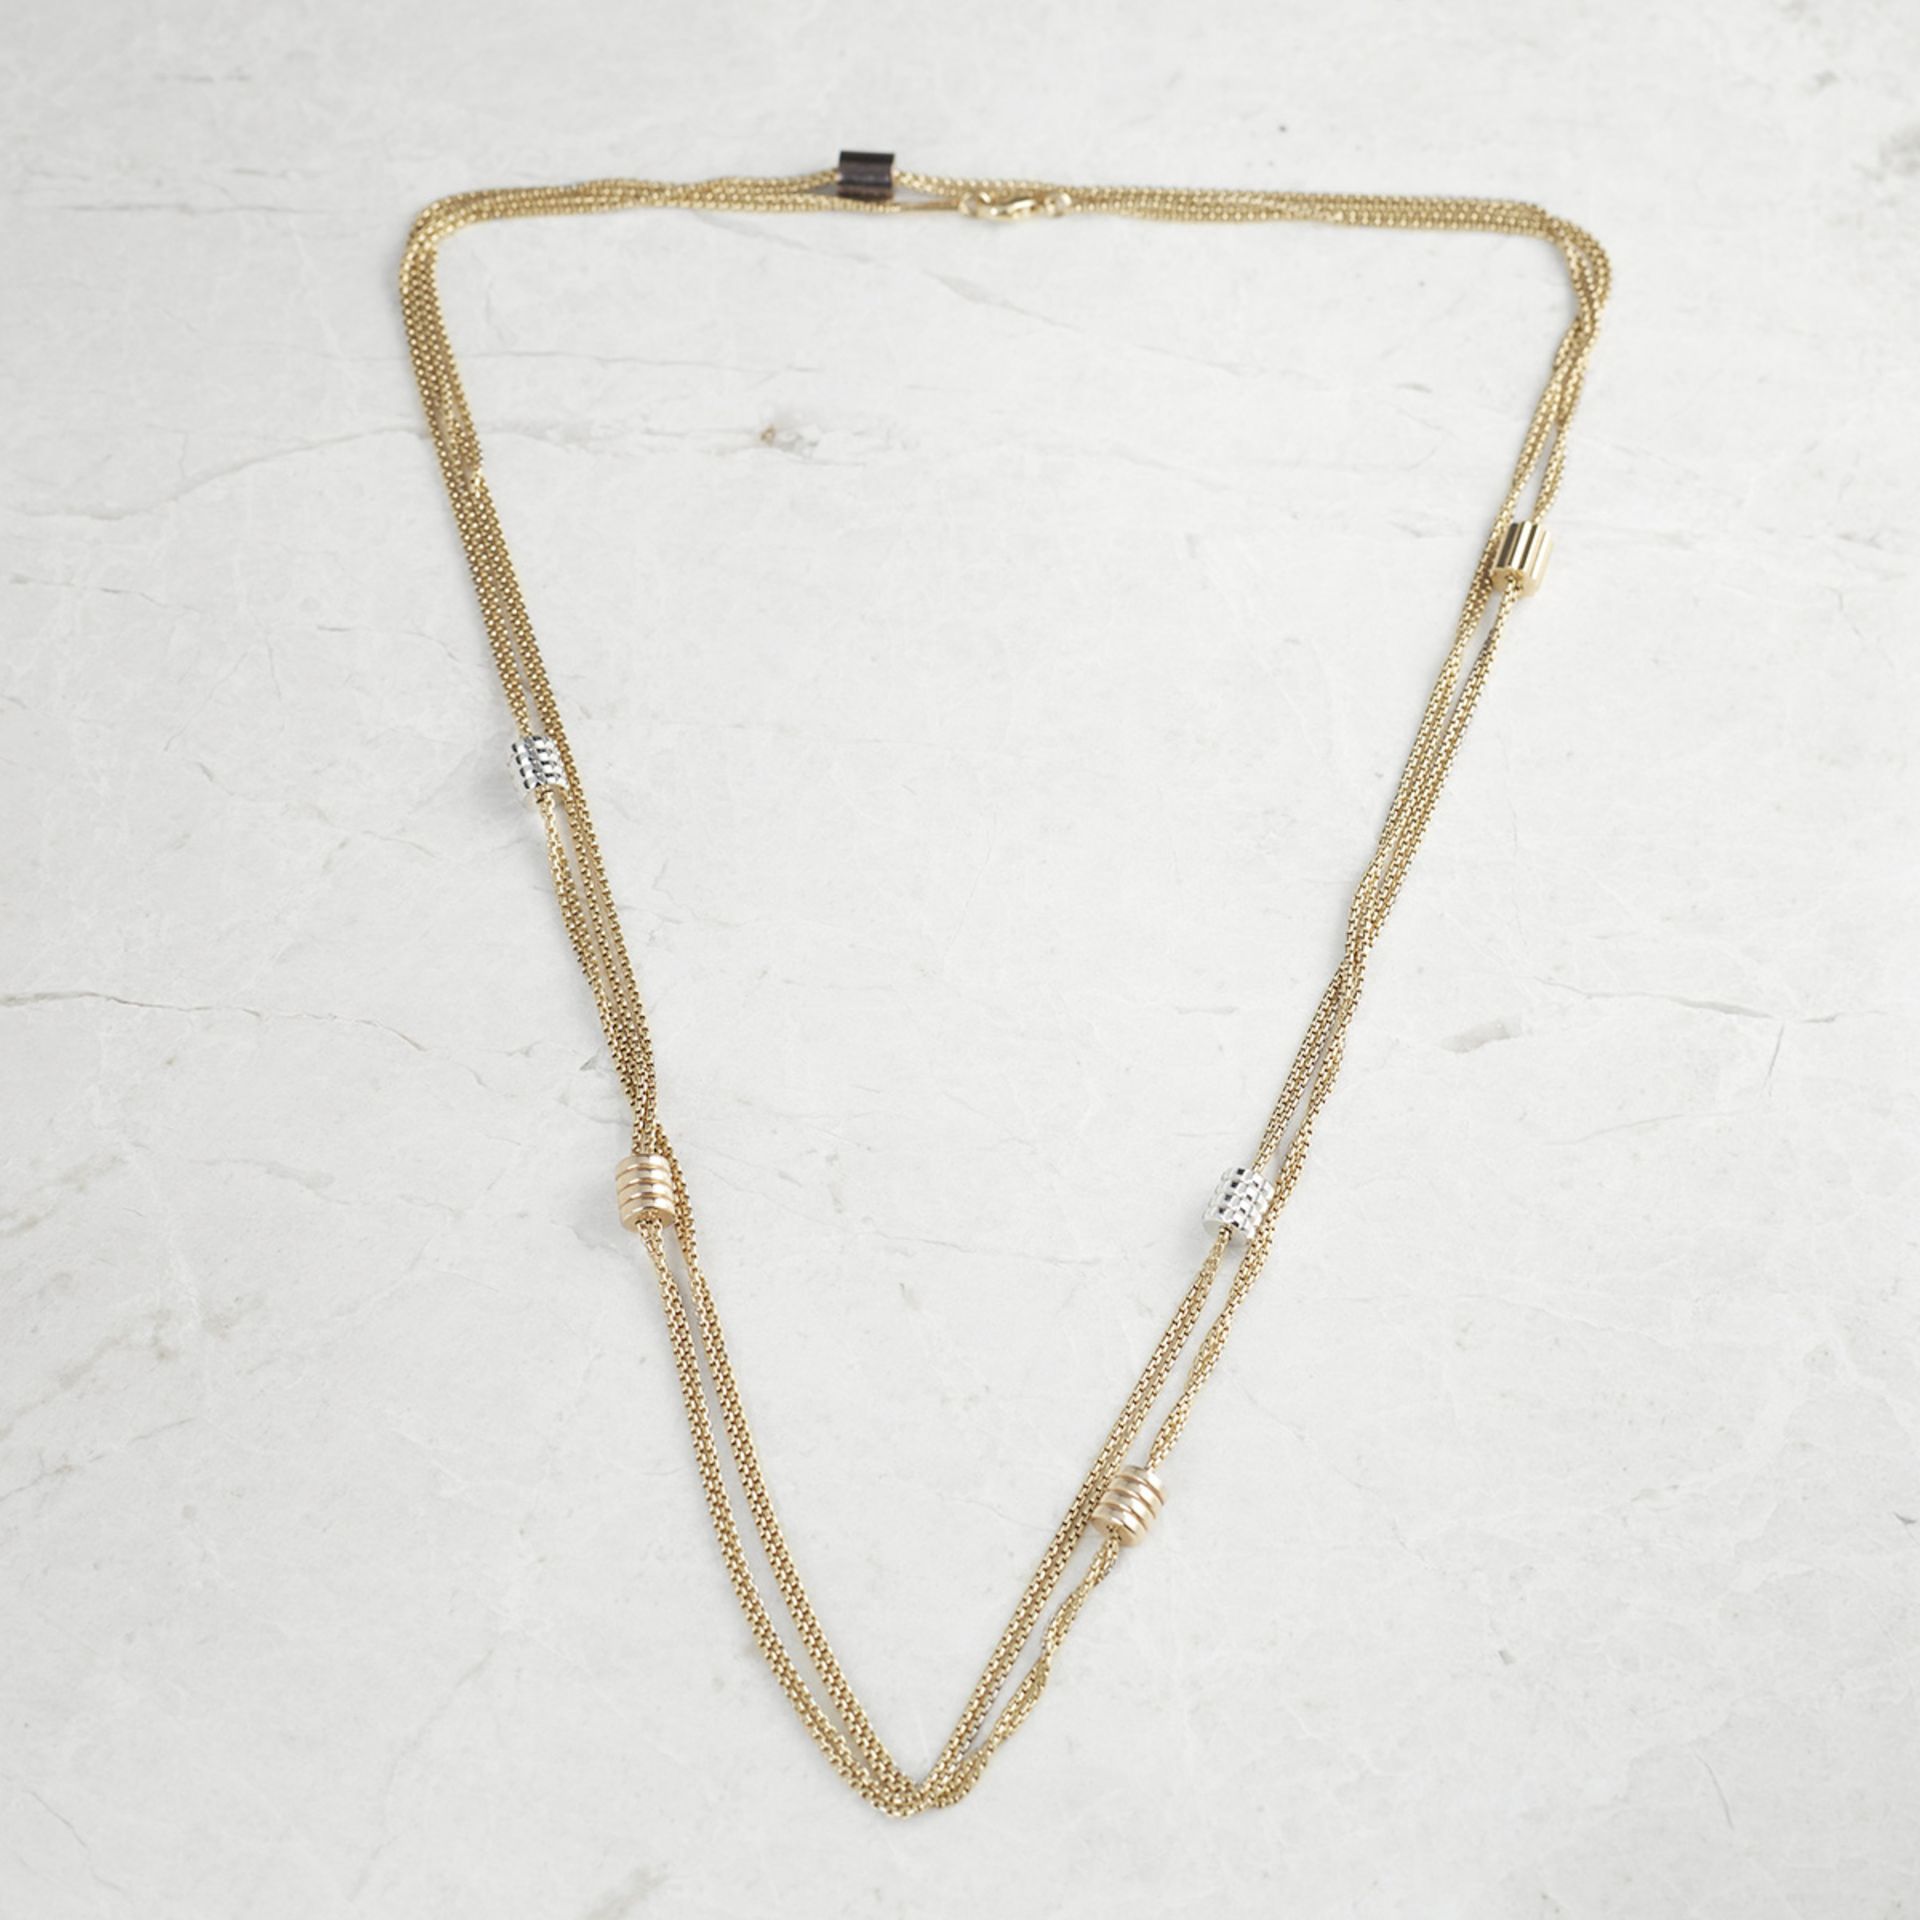 Boucheron 18k Yellow Gold Chain Necklace - Image 6 of 7